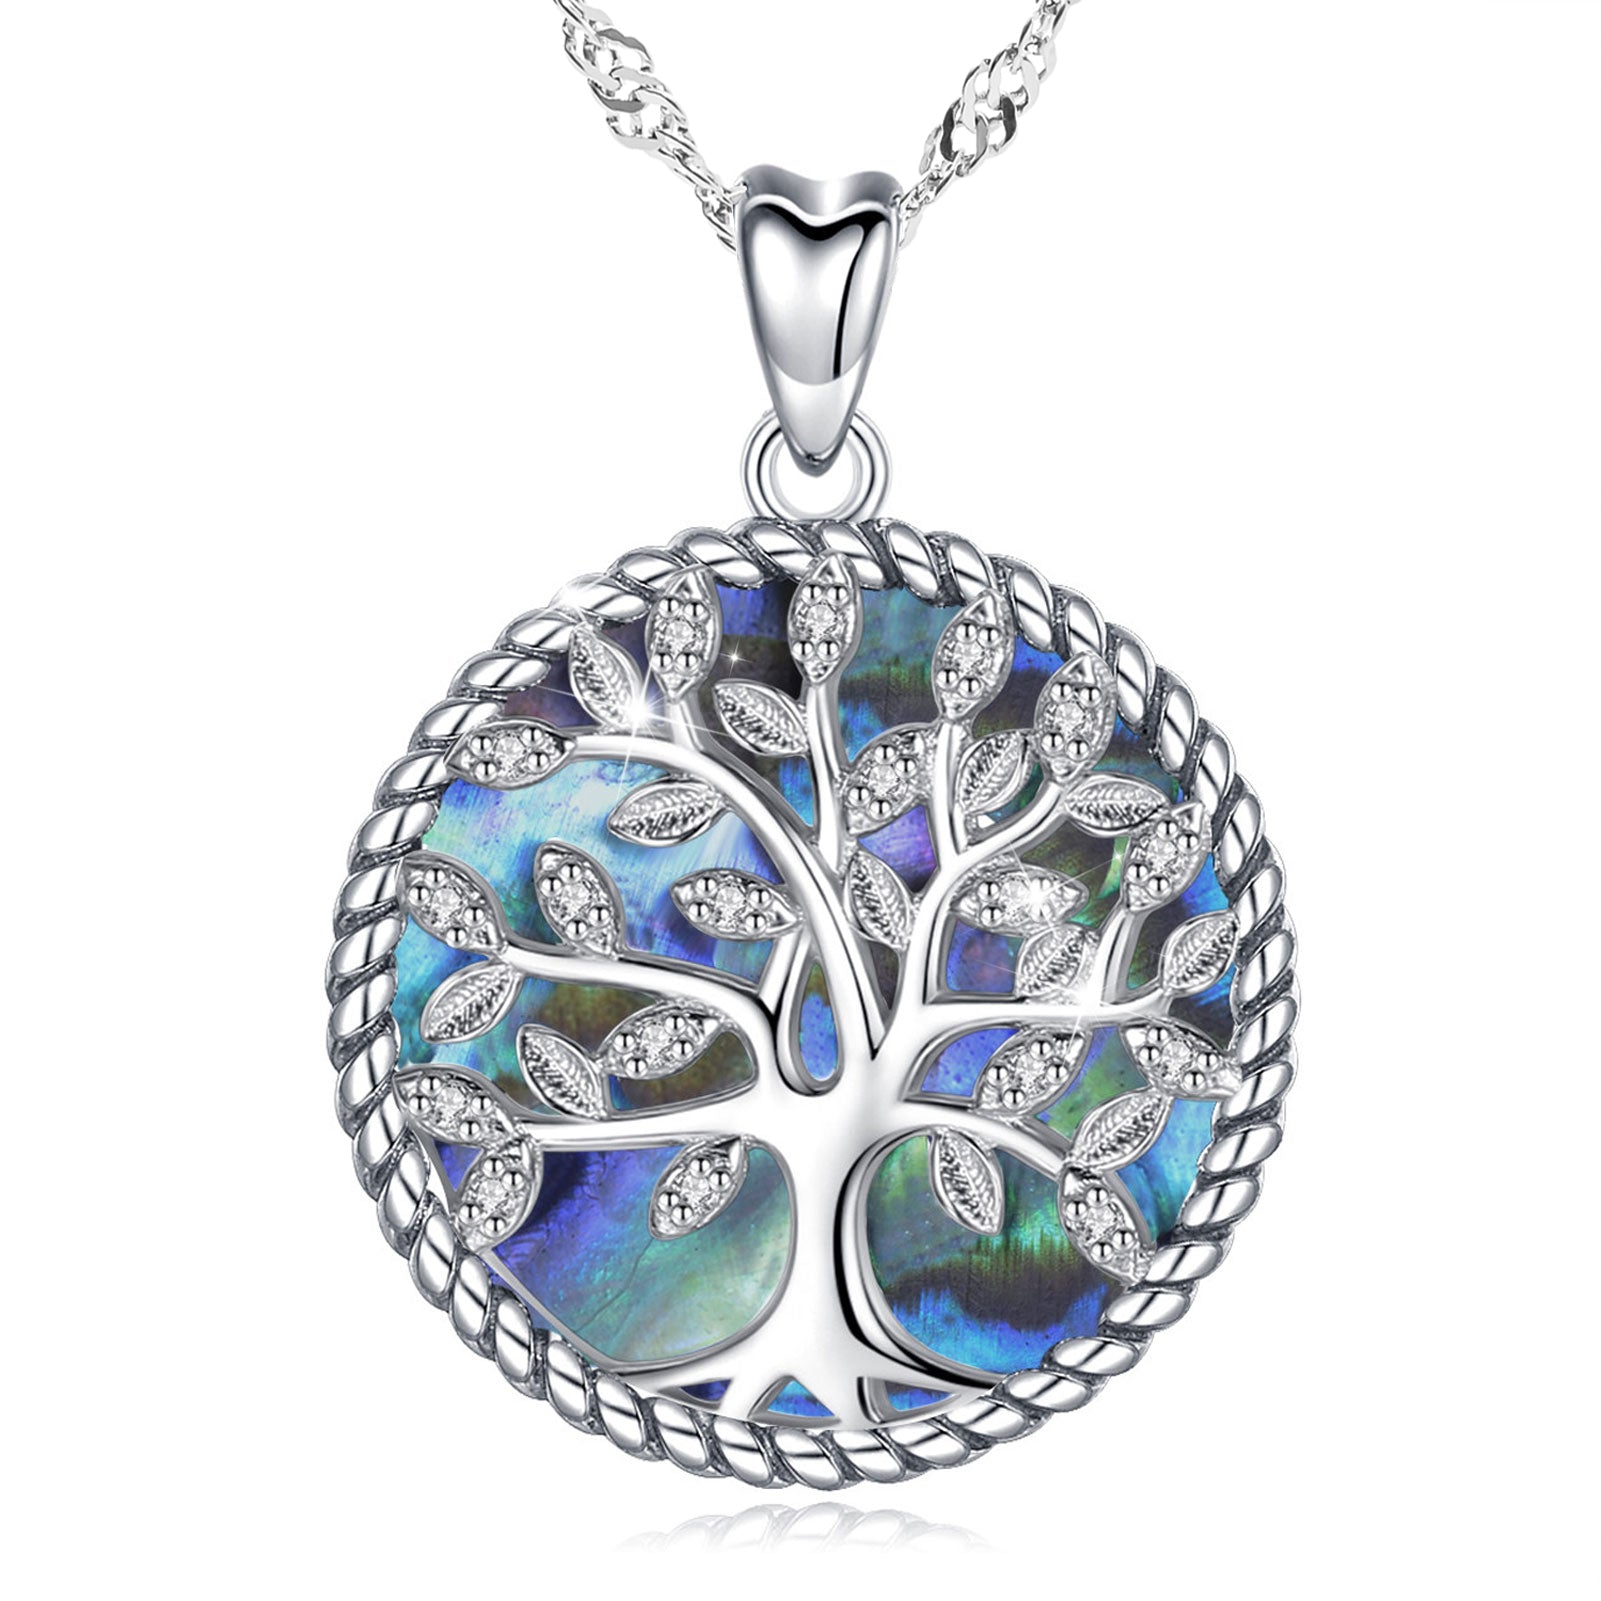 Crystal Tree of Life Abalone Shell pendant with 925 Sterling Silver Water Wave necklace chain 18"